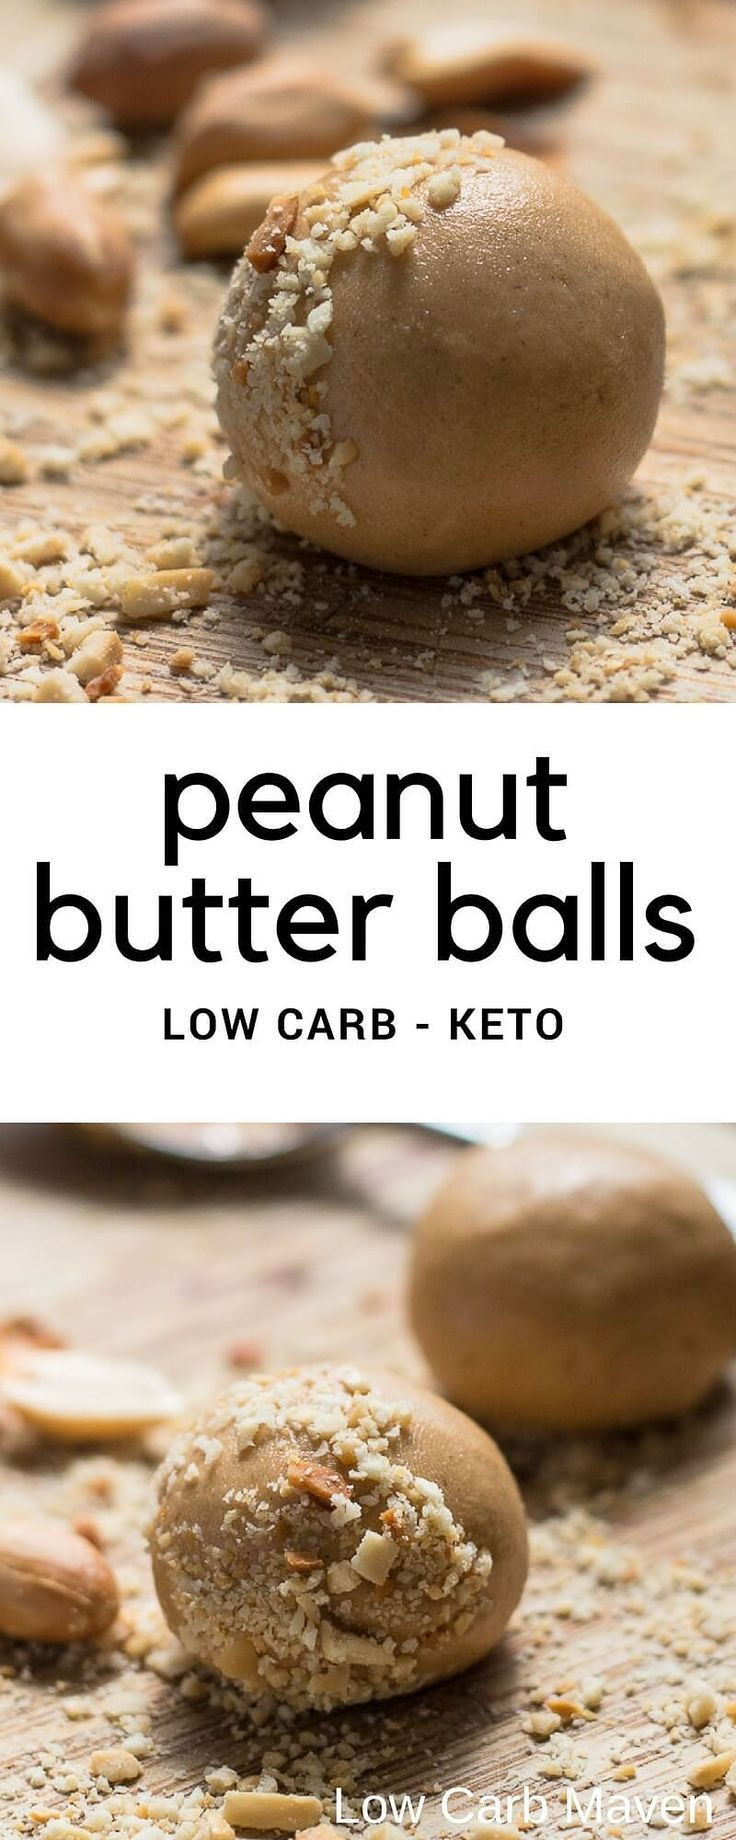 Protein Powder Desserts Low Carb
 Low carb peanut butter balls made from protein powder and